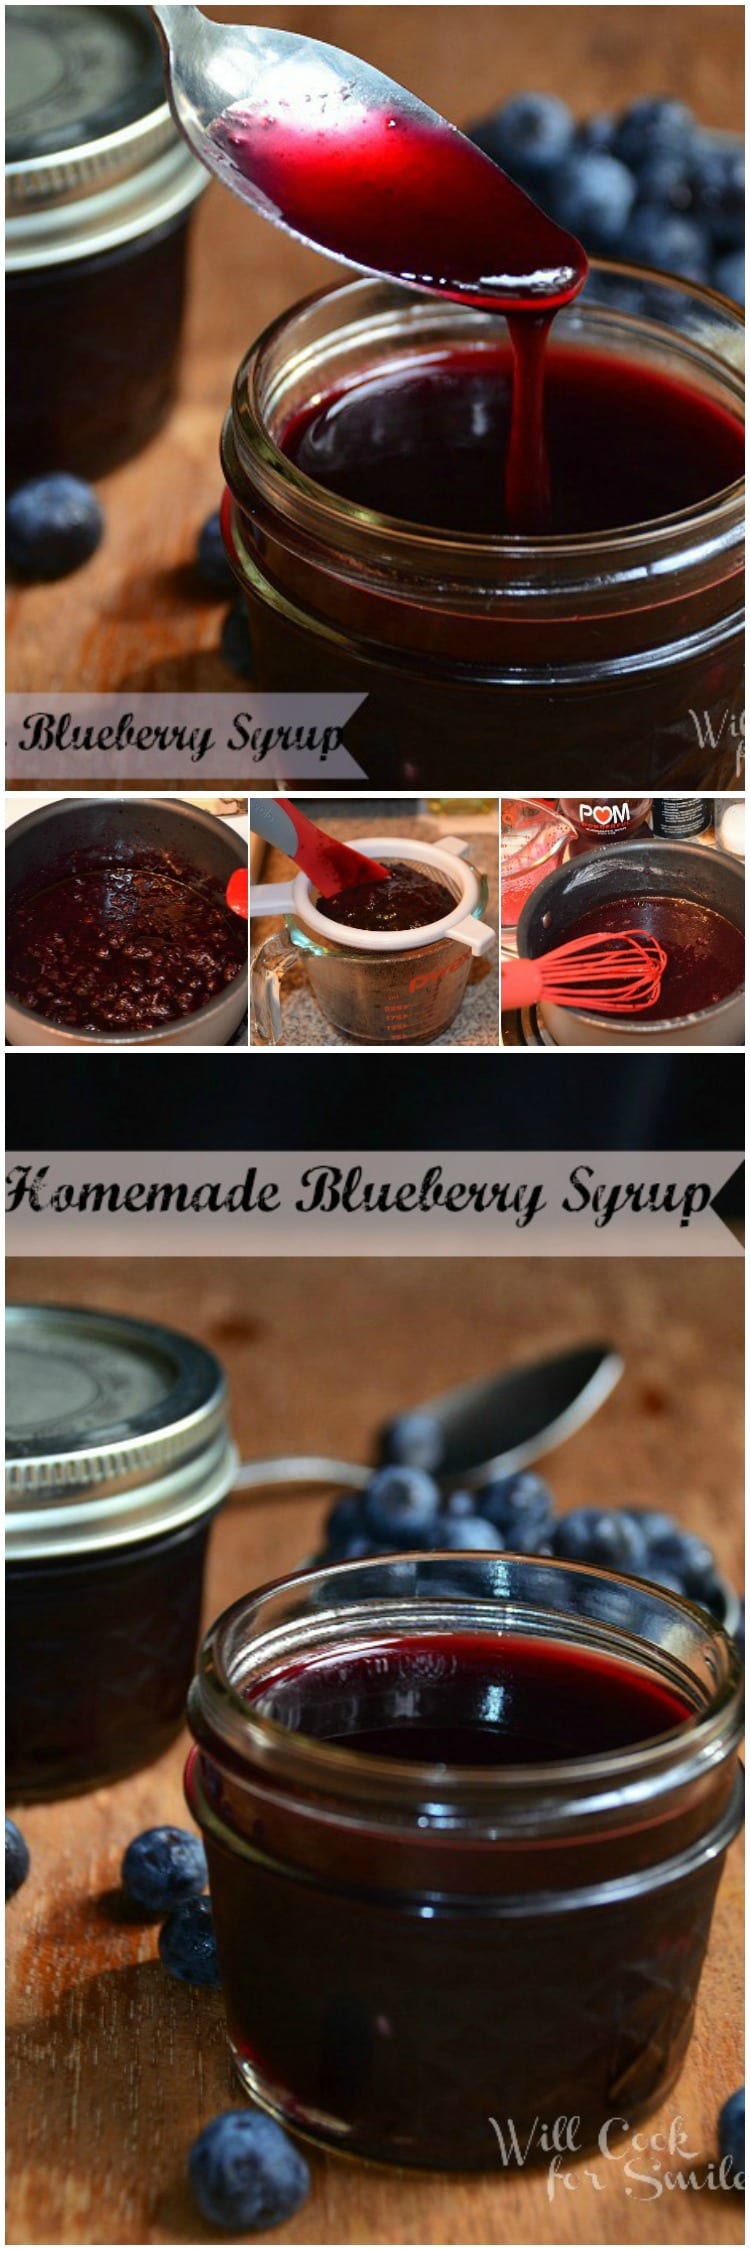 blueberry syrup collage 